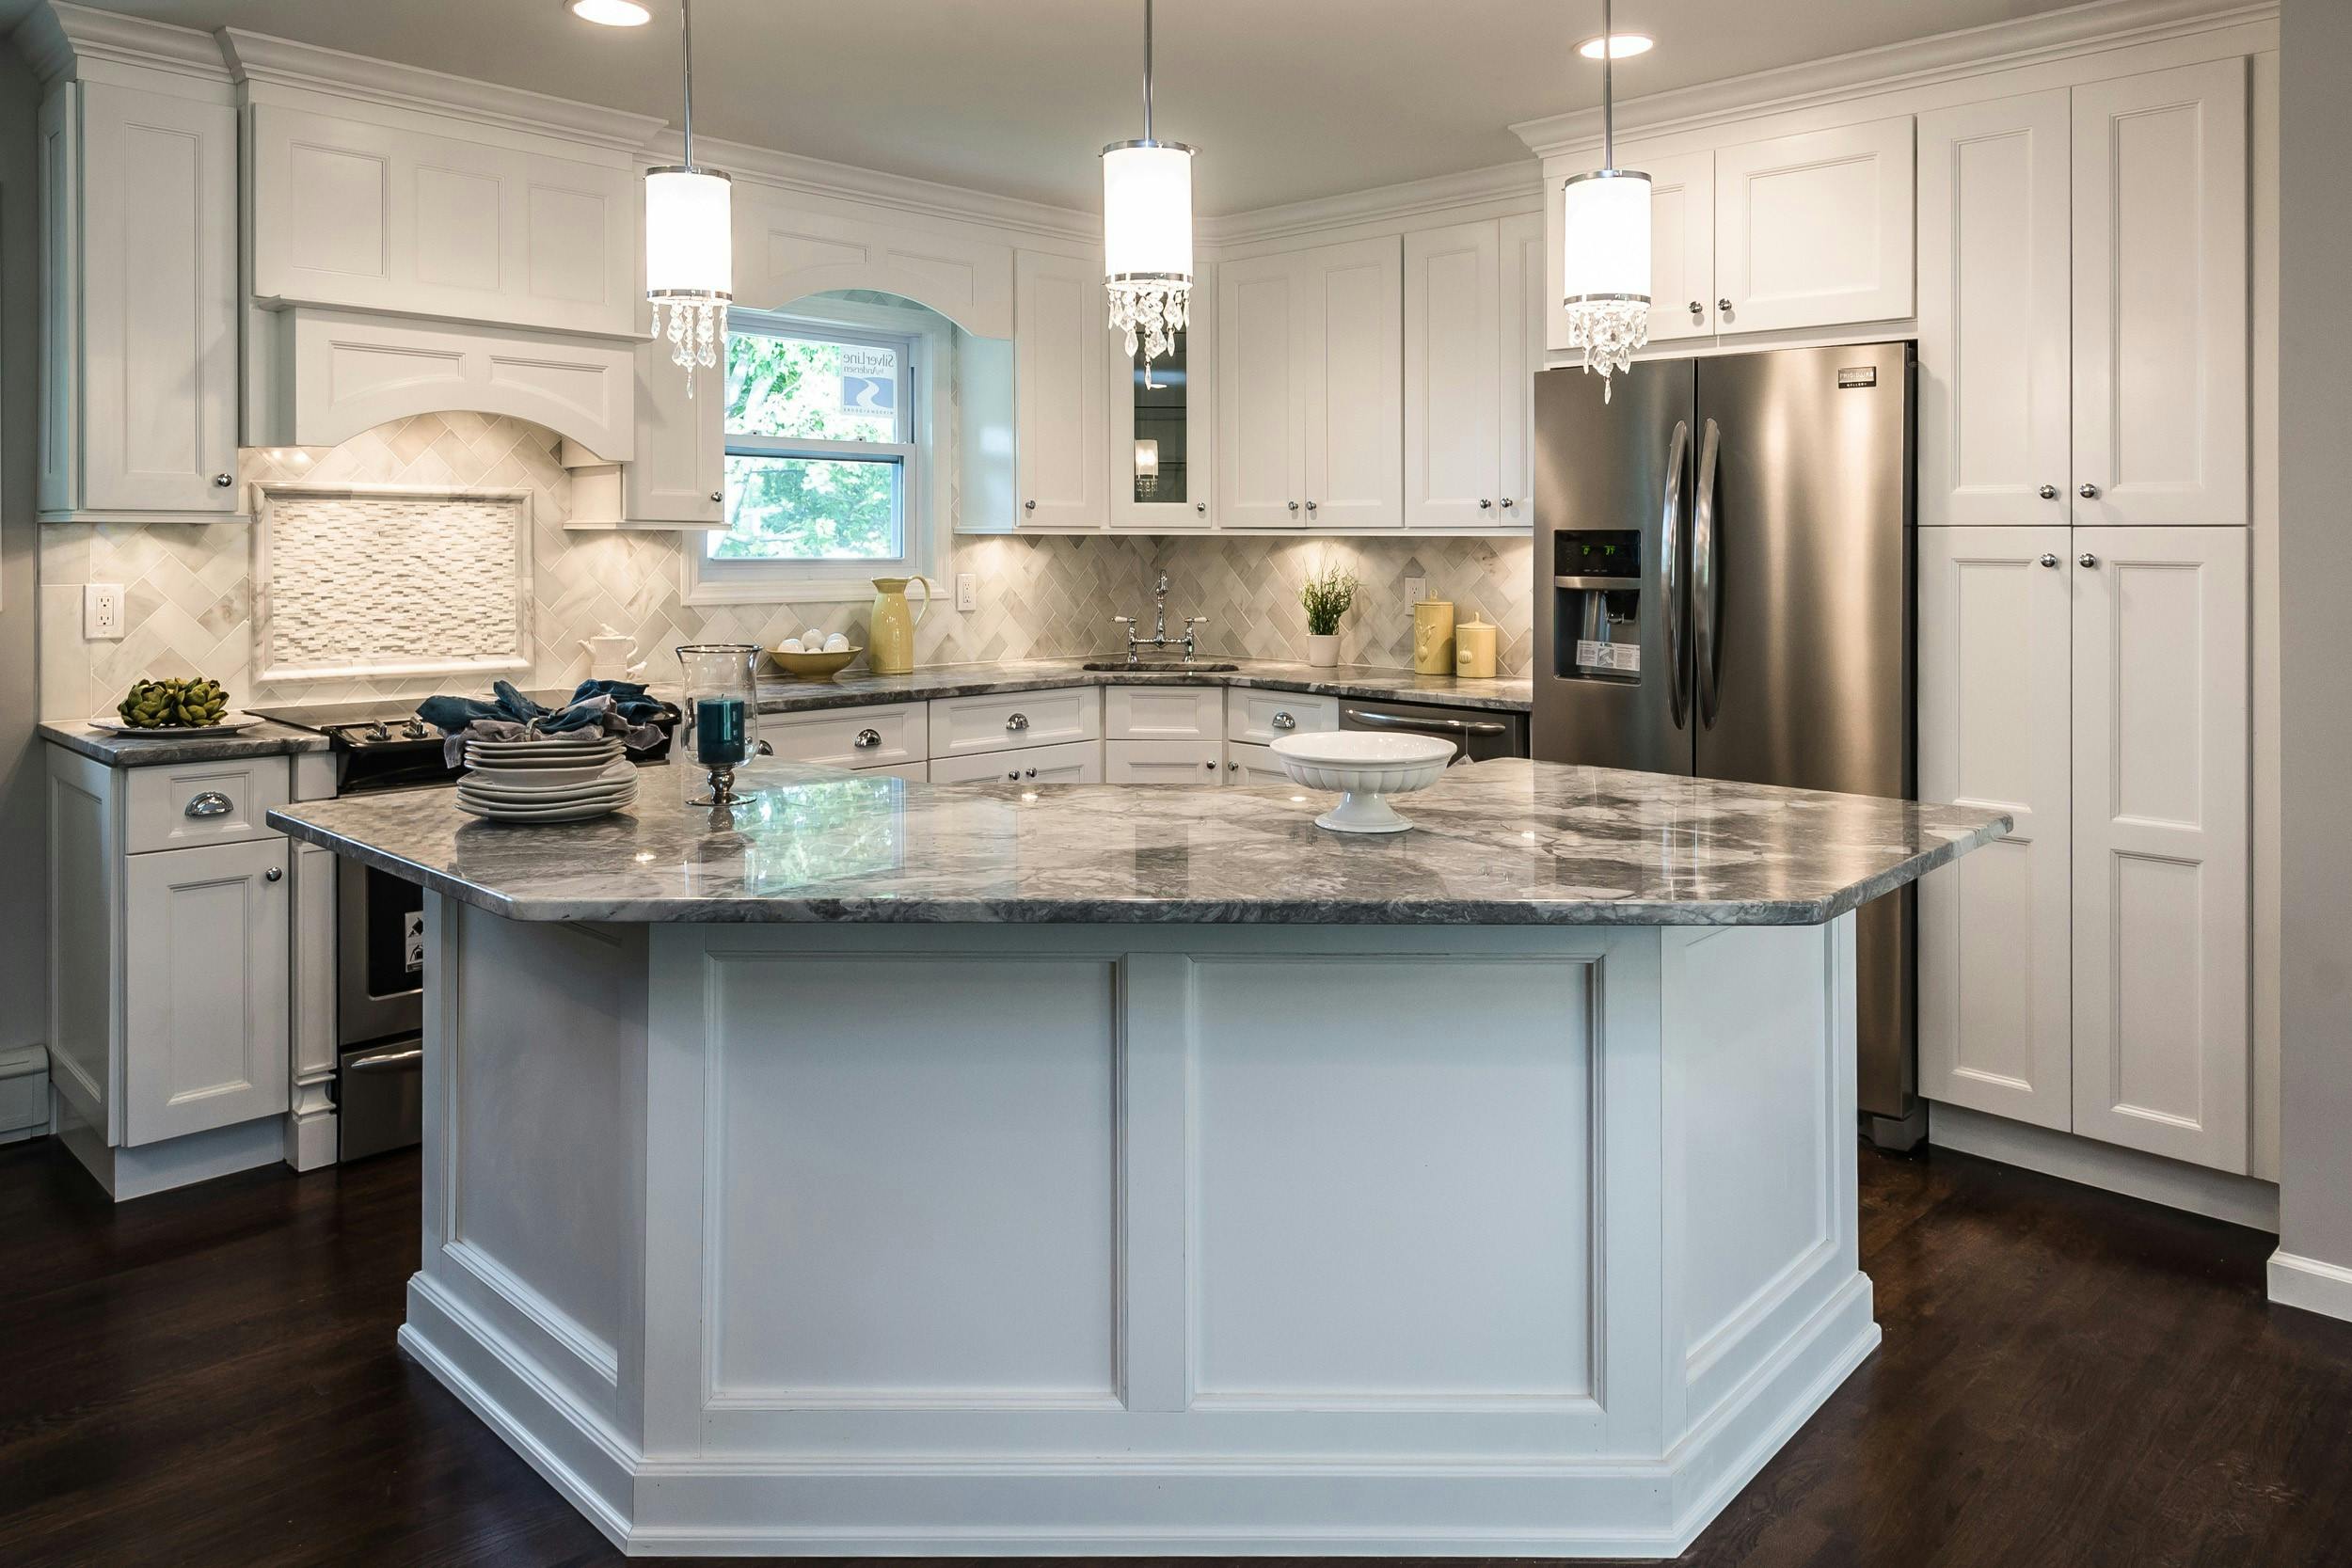 Kitchen Countertops And Cabinets, How To Match Countertops With Cabinets